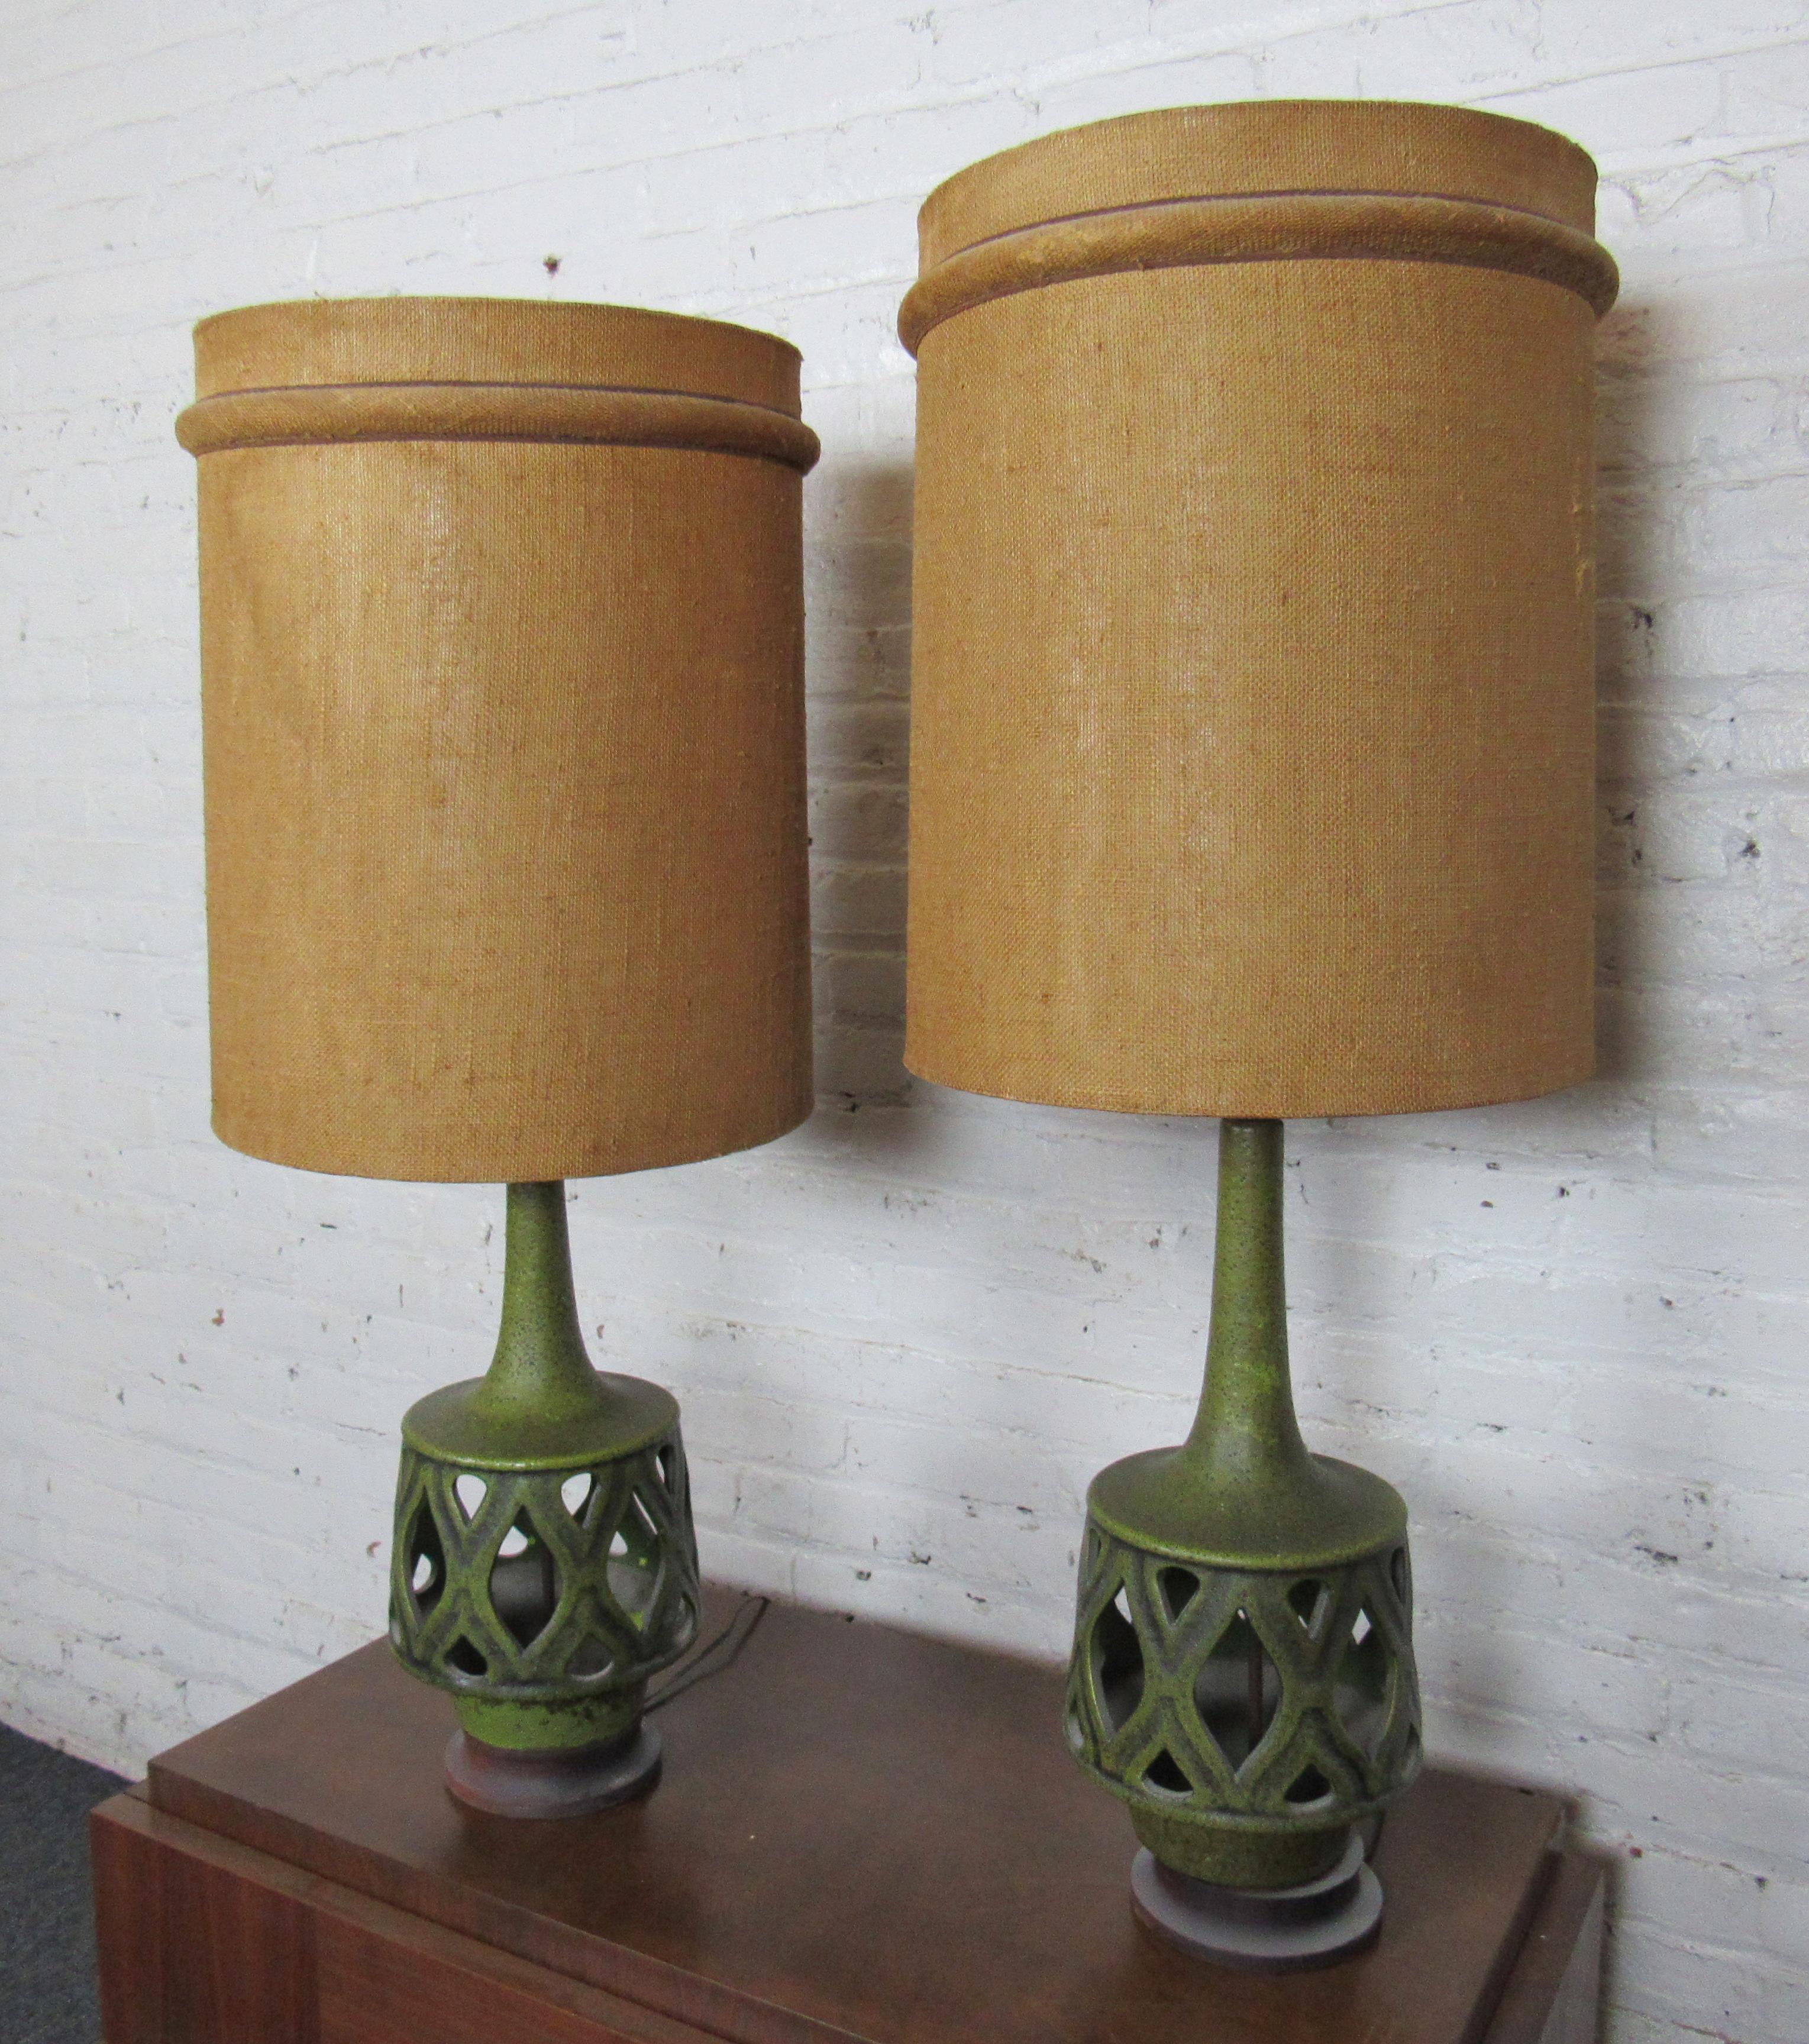 Pair of large vintage table lamps with bases cast in a brilliant green ceramic color. Lampshades are crafted from a tan fabric that make this pair of lamps eye-catching and full of character.

(Please confirm item location - NY or NJ - with